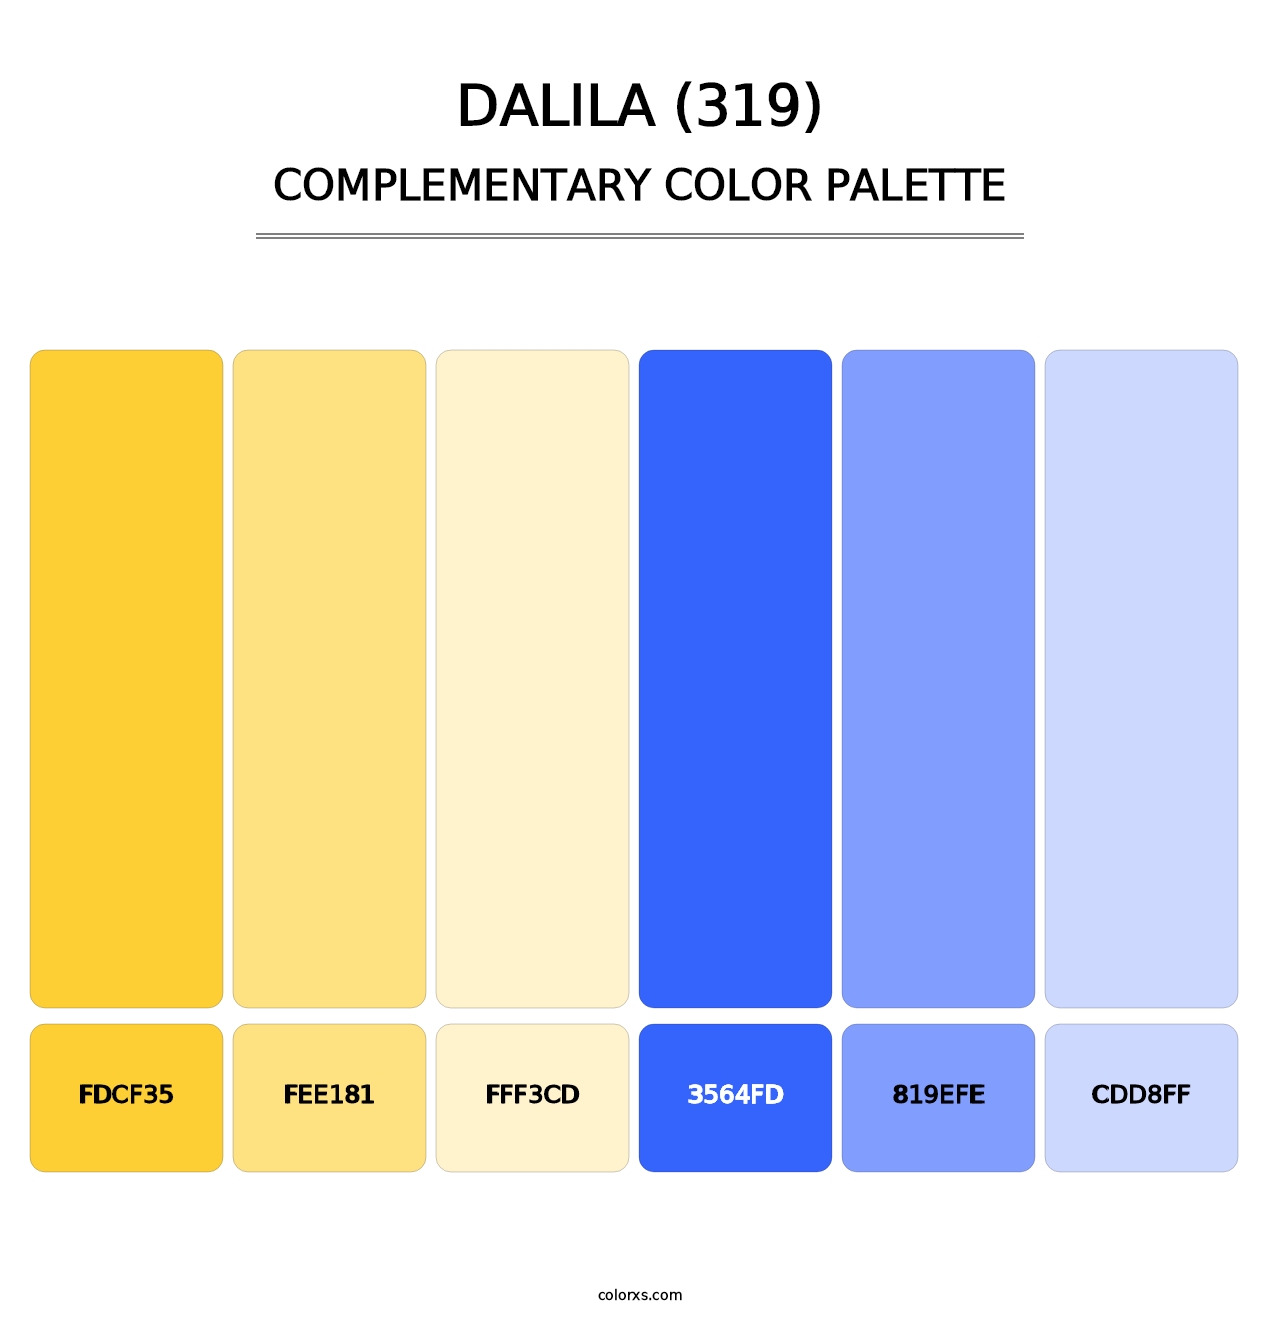 Dalila (319) - Complementary Color Palette